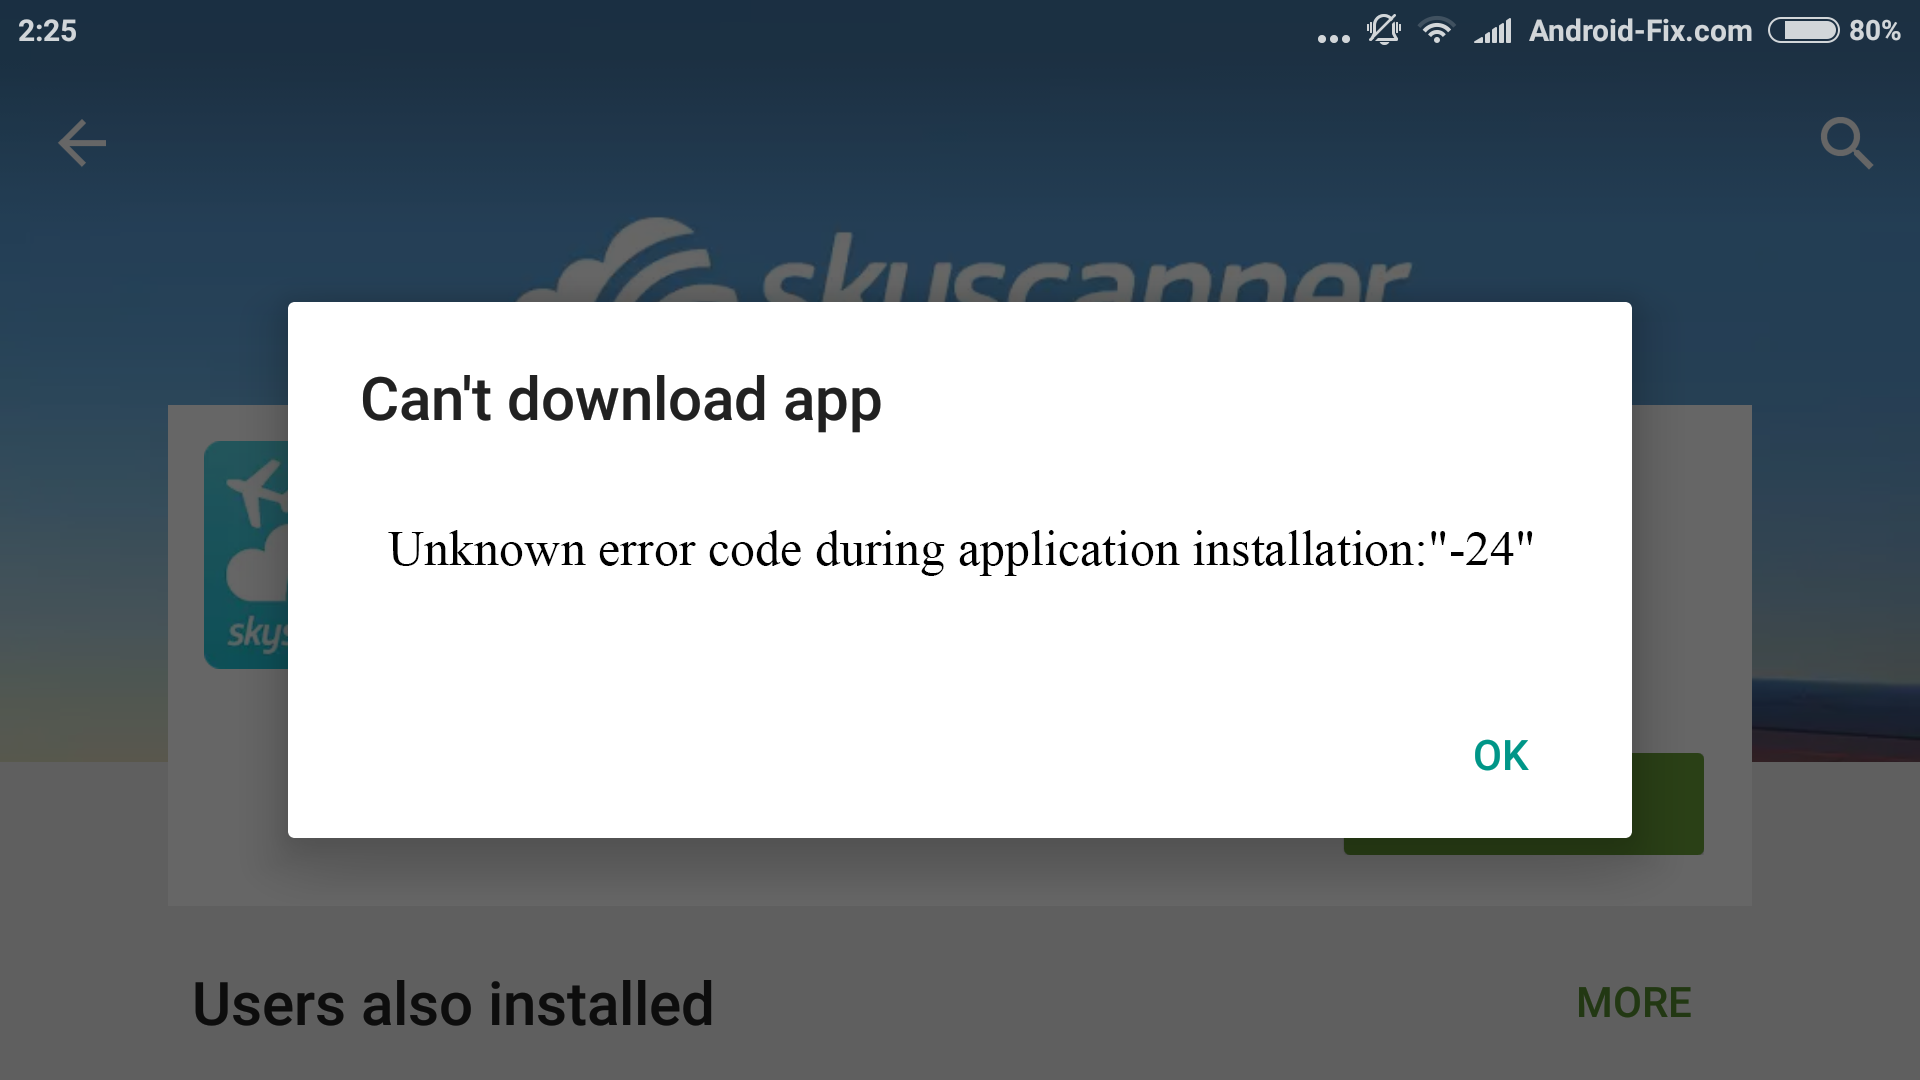 Reinstalling the application may fix this problem. Google Play "ошибка сервера". Руфус ошибка could not retrieve Architectures from Server. Error: retrieving GPG Key timed out..